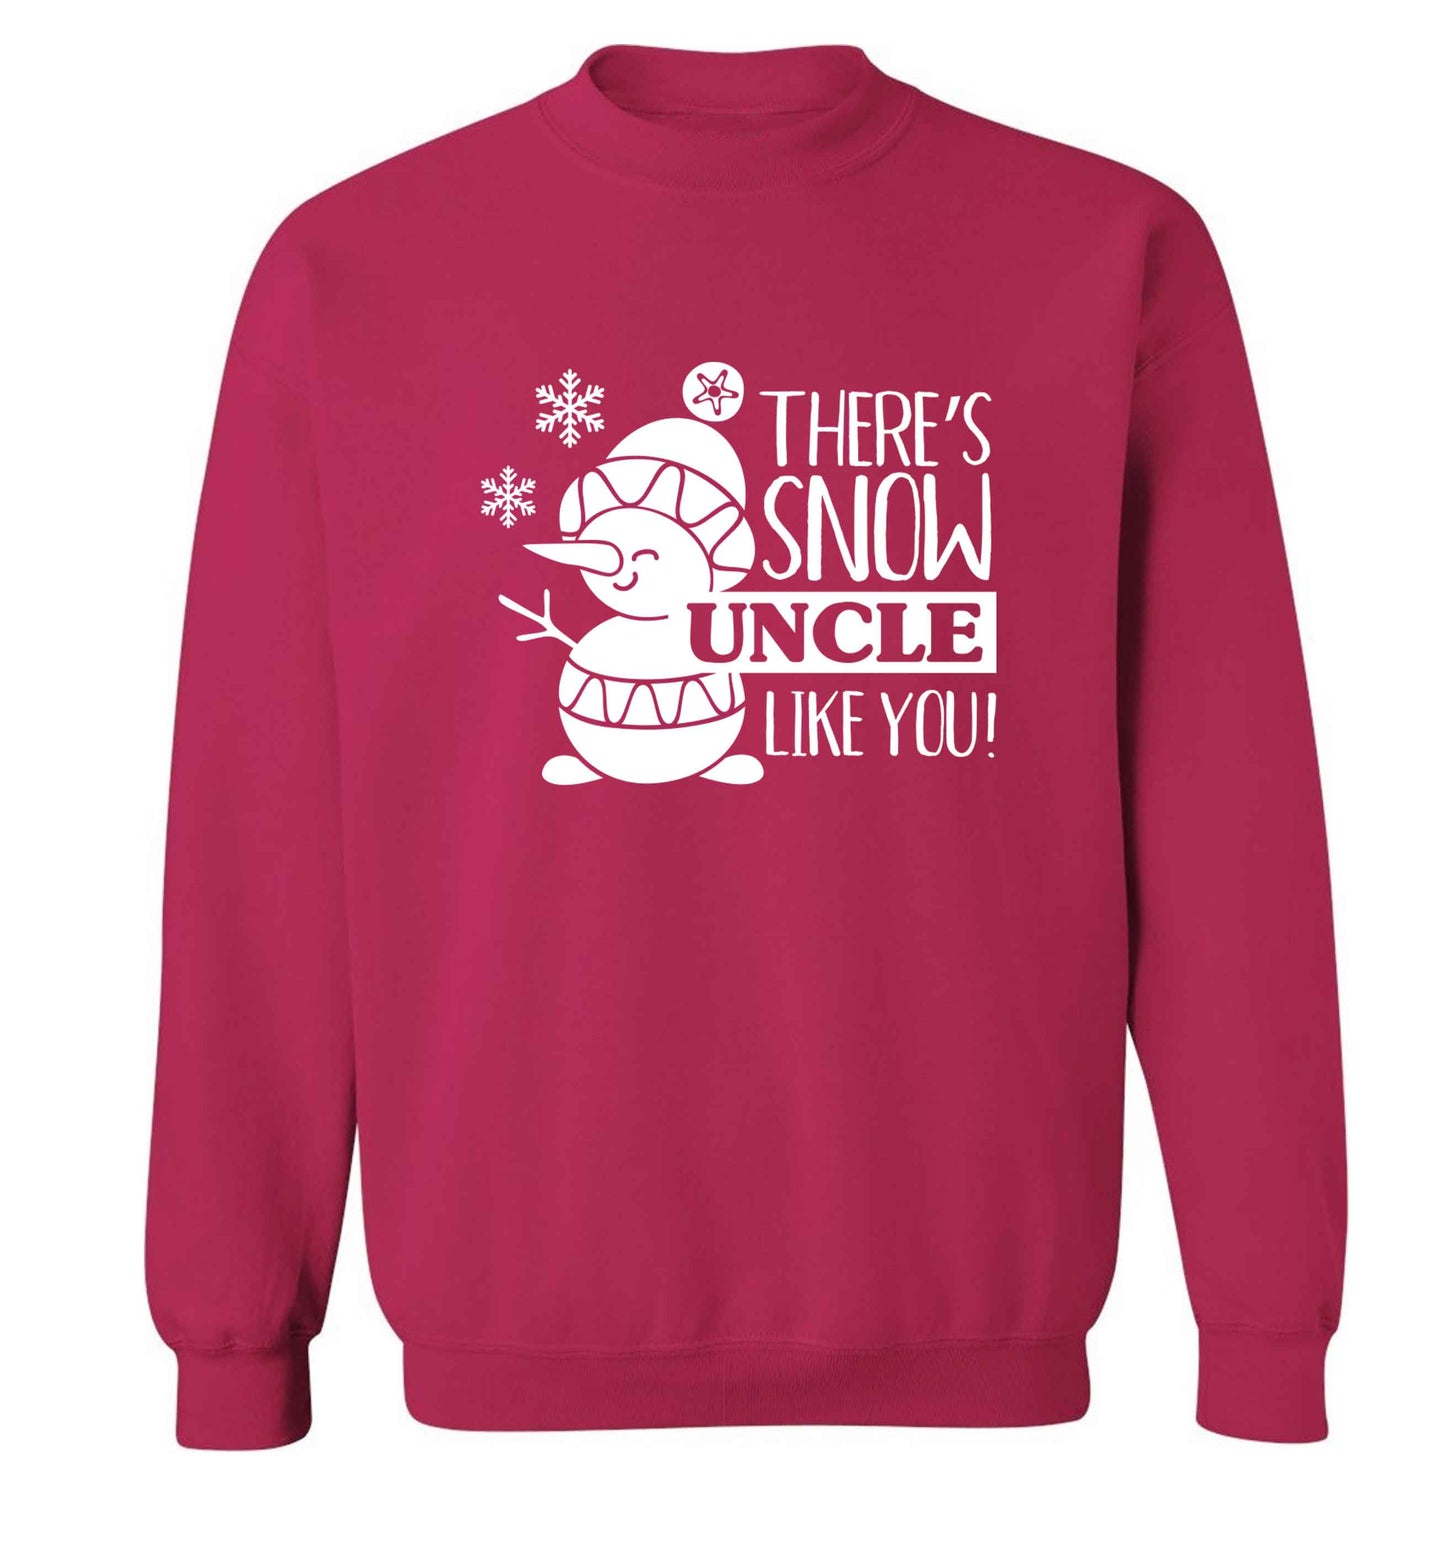 There's snow uncle like you adult's unisex pink sweater 2XL